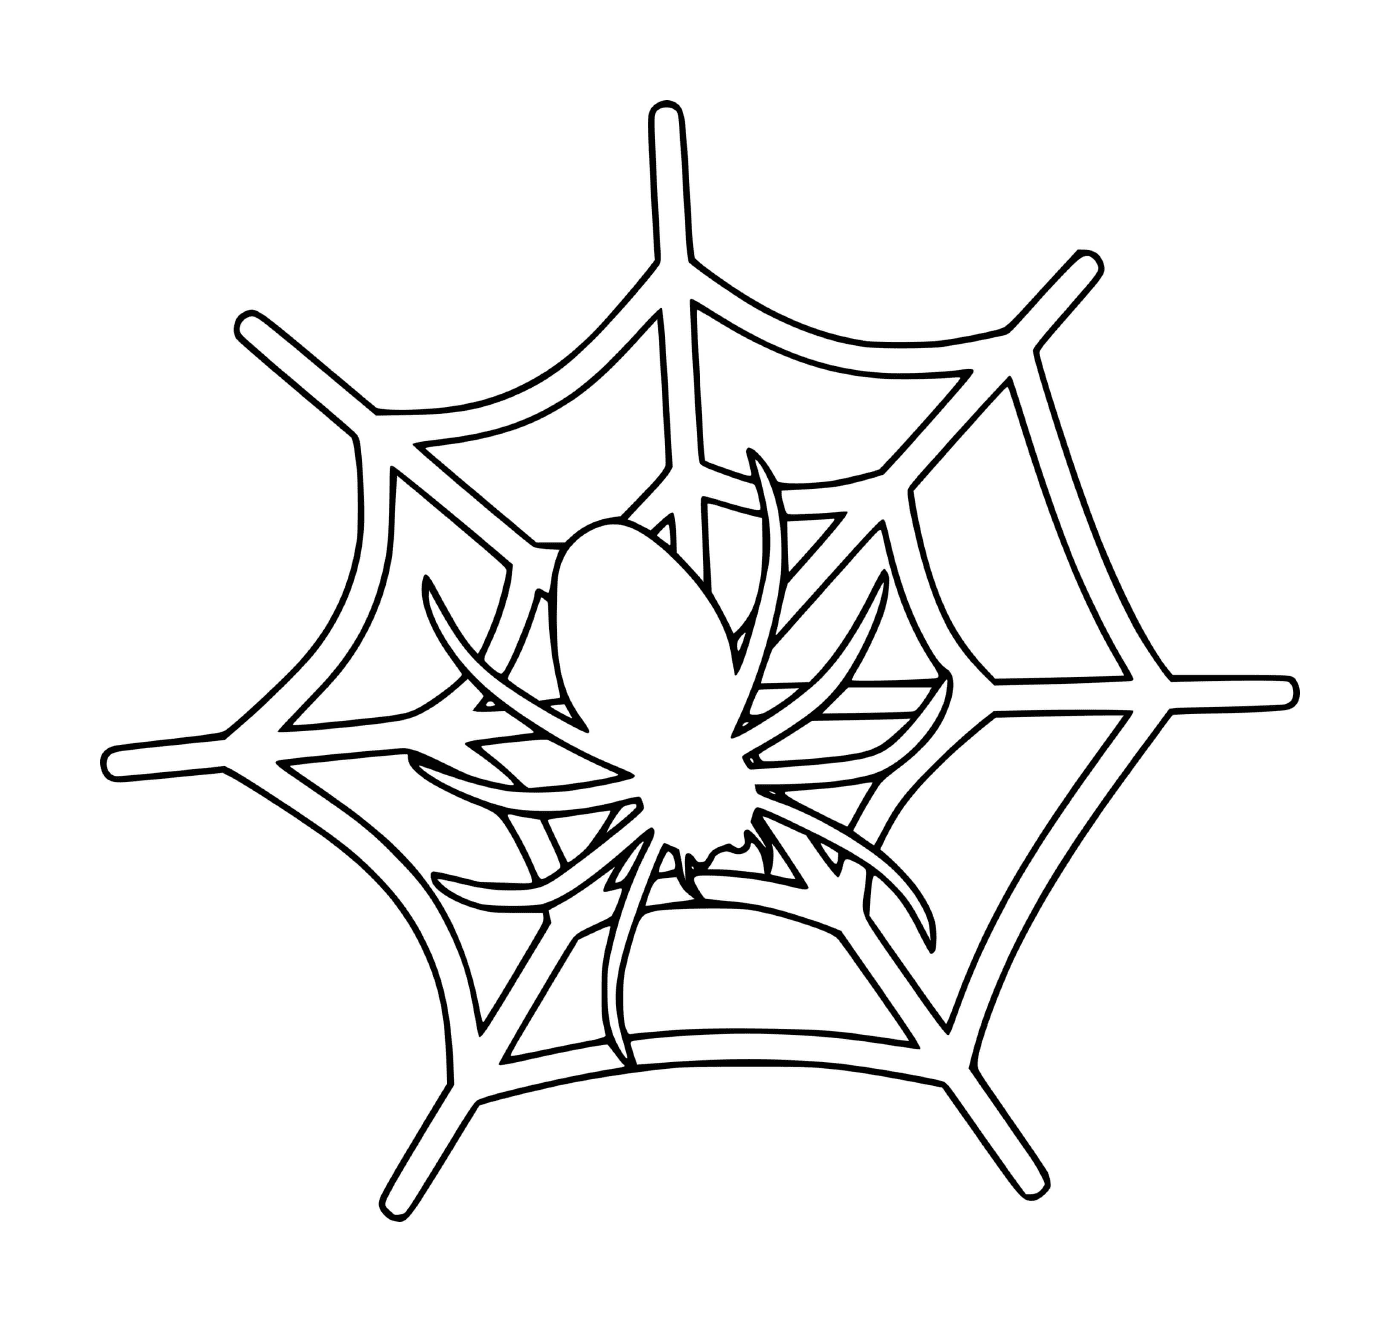  A spider on a web 